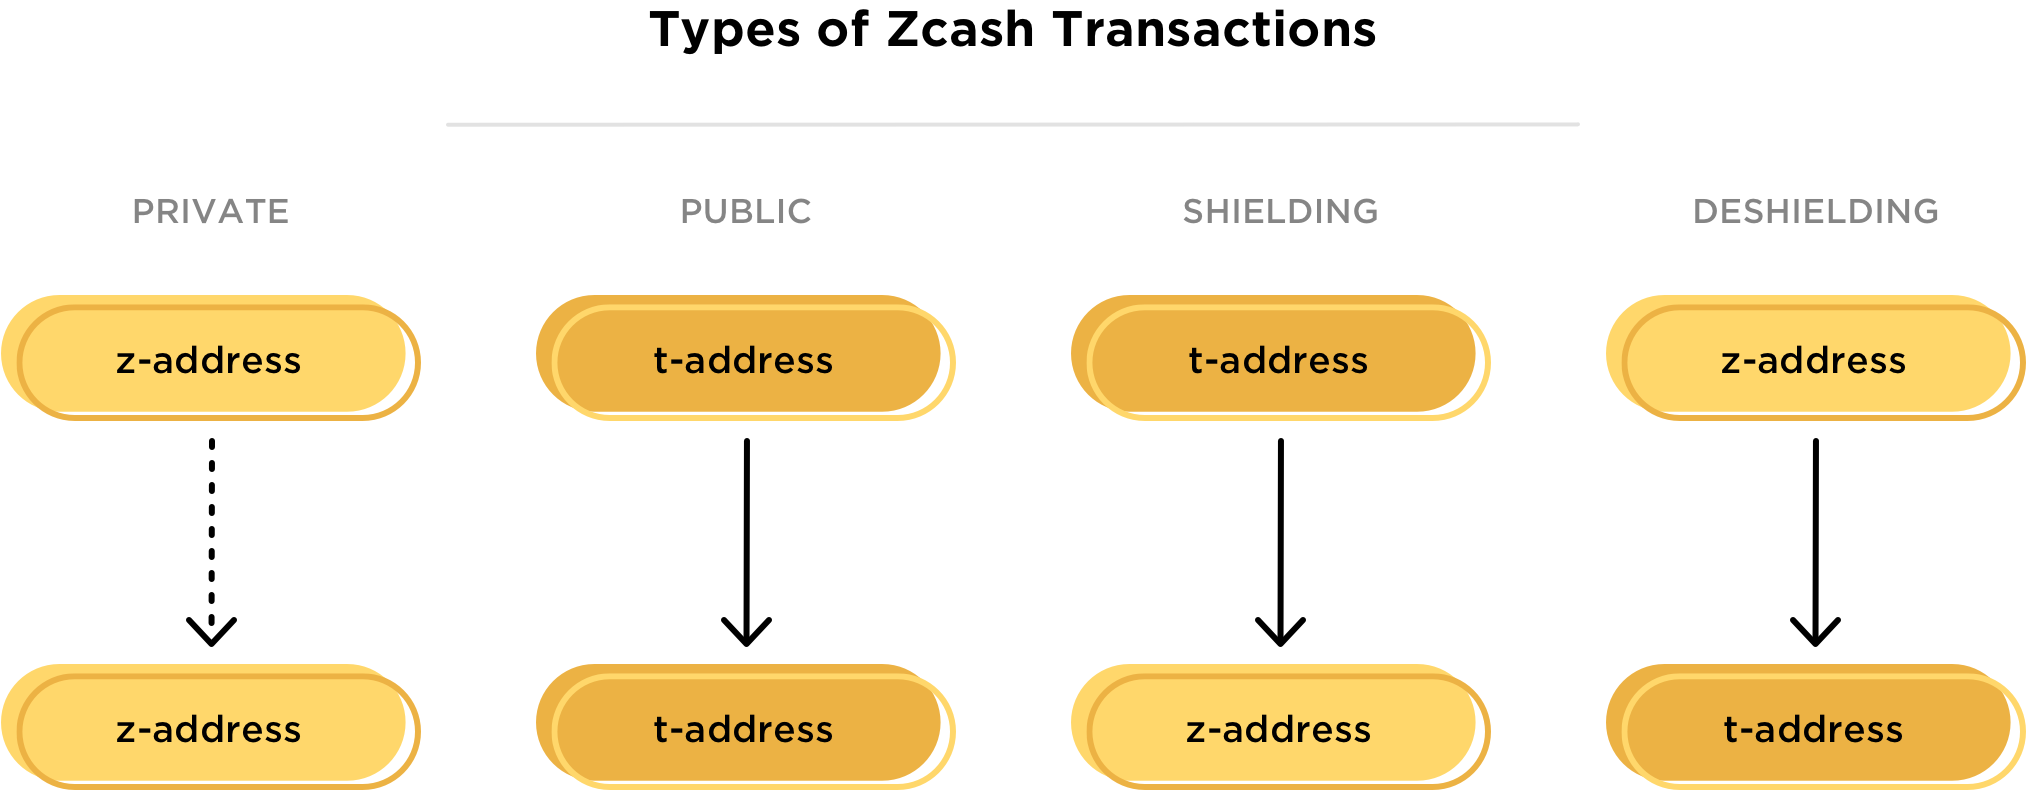 How to use Zcash - cryptolog.fun